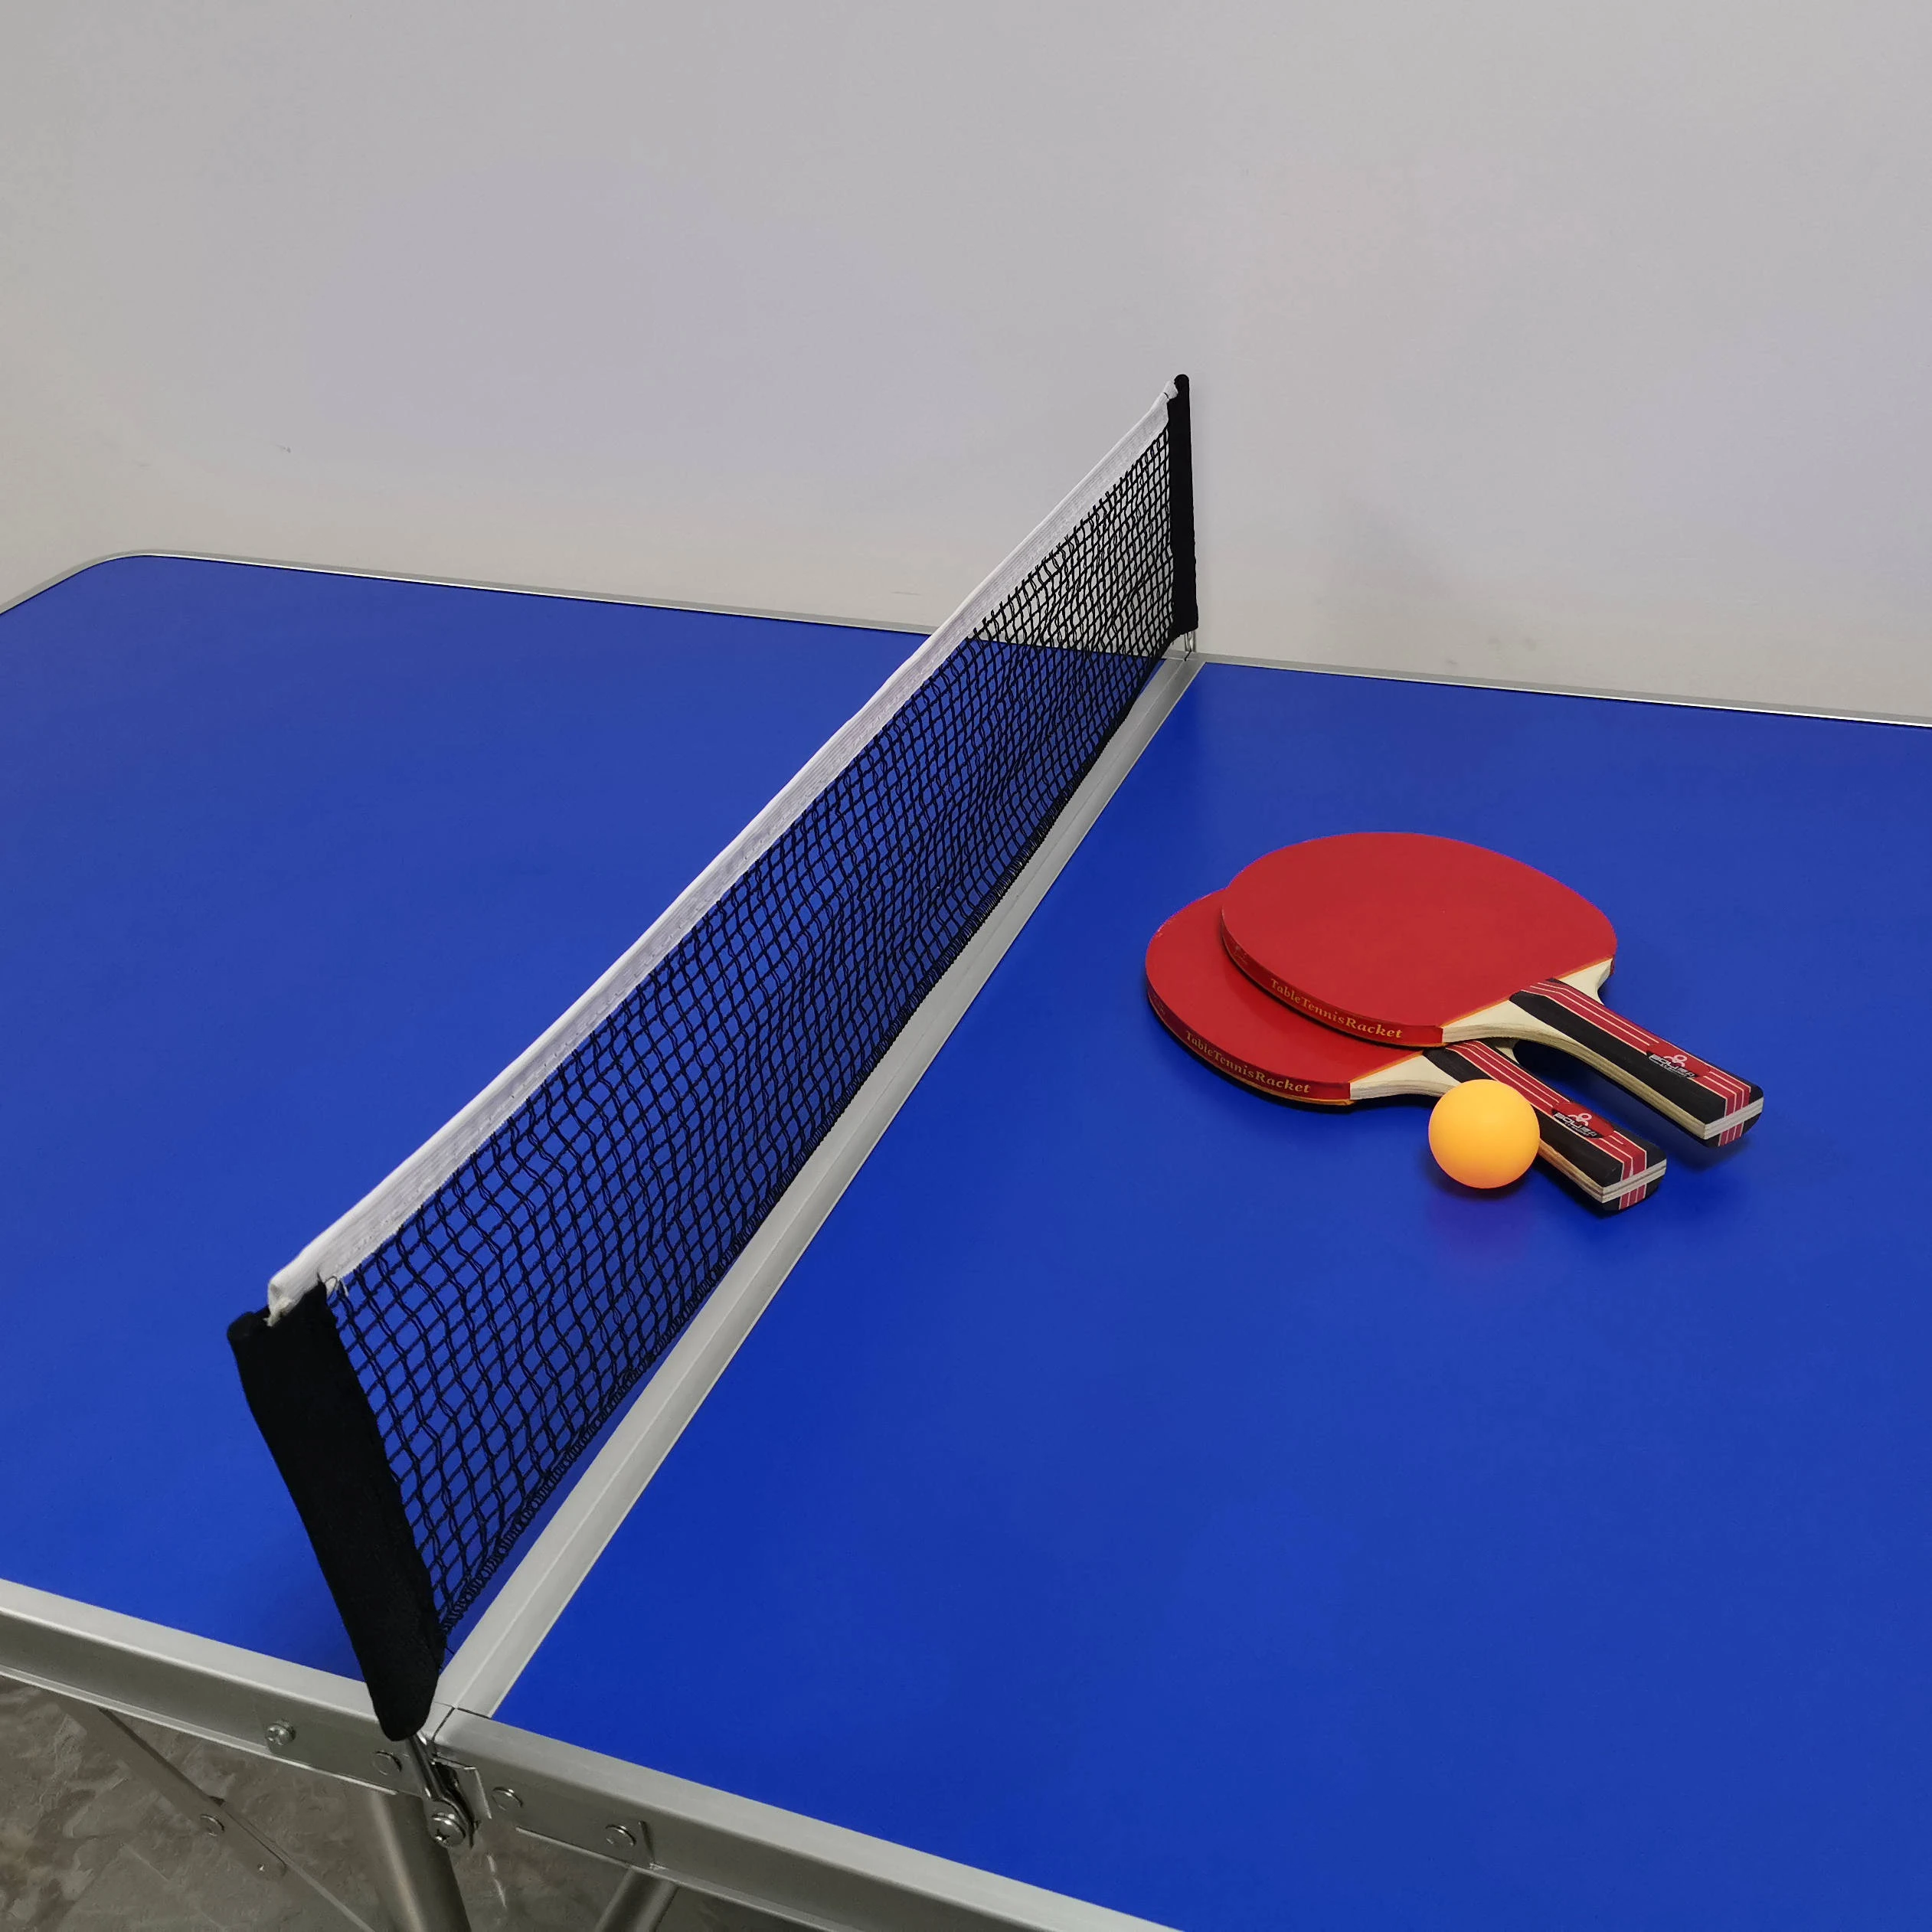 60" Portable Tennis Table, Folding PingPong Table Game Set with Net, 2 Table Tennis Paddles and 2 PingPong Balls for Indoor/Ou